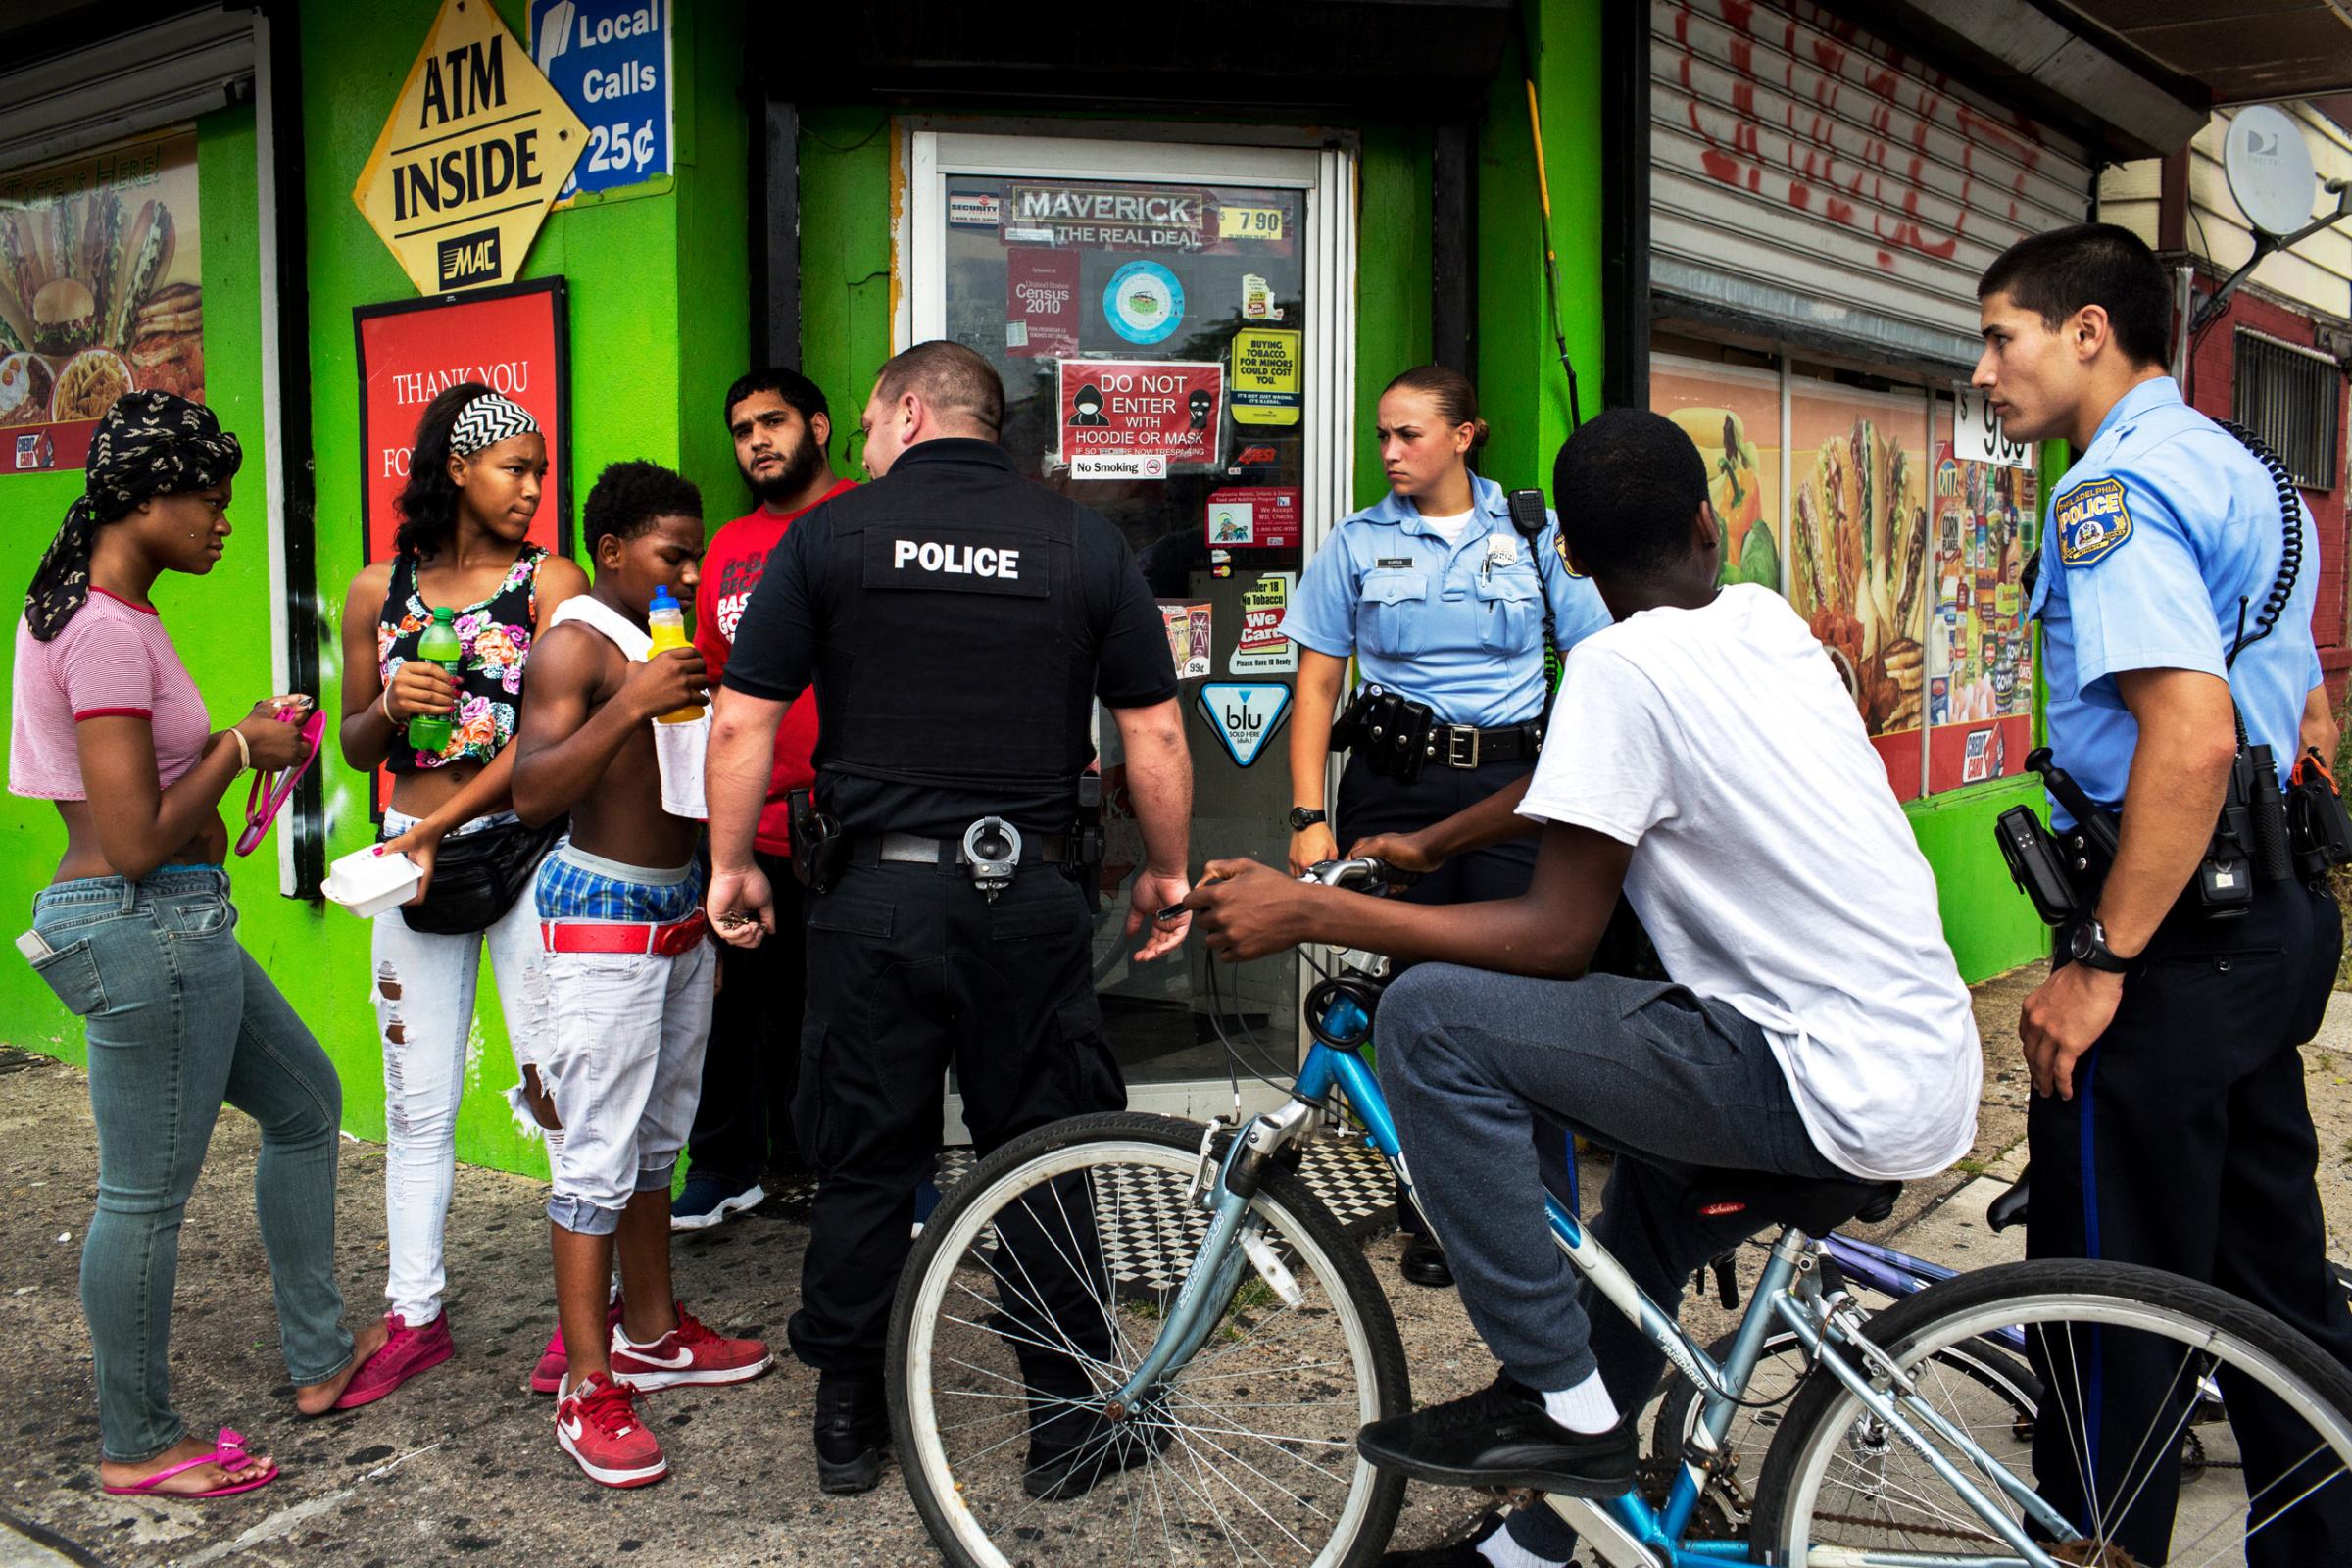 July 28th, 2015. Philadelphia, PA. After a shooting nearby with reports of a suspect fleeing on a bicycle, officer Ryan Mundrick (center, black clothes) joins "foot beats" Ashley Sipos (center right police officer) and Jonathan Dedos (right) in questioning a group of youth as they come out of a bodega. Dispatch had sent out information that there was a black male suspect on a bicycle so police fanned out looking for people of that description, including many of the youth in the neighborhood. After a brief interaction the police and youth went their separate ways without incident. (Natalie Keyssar)